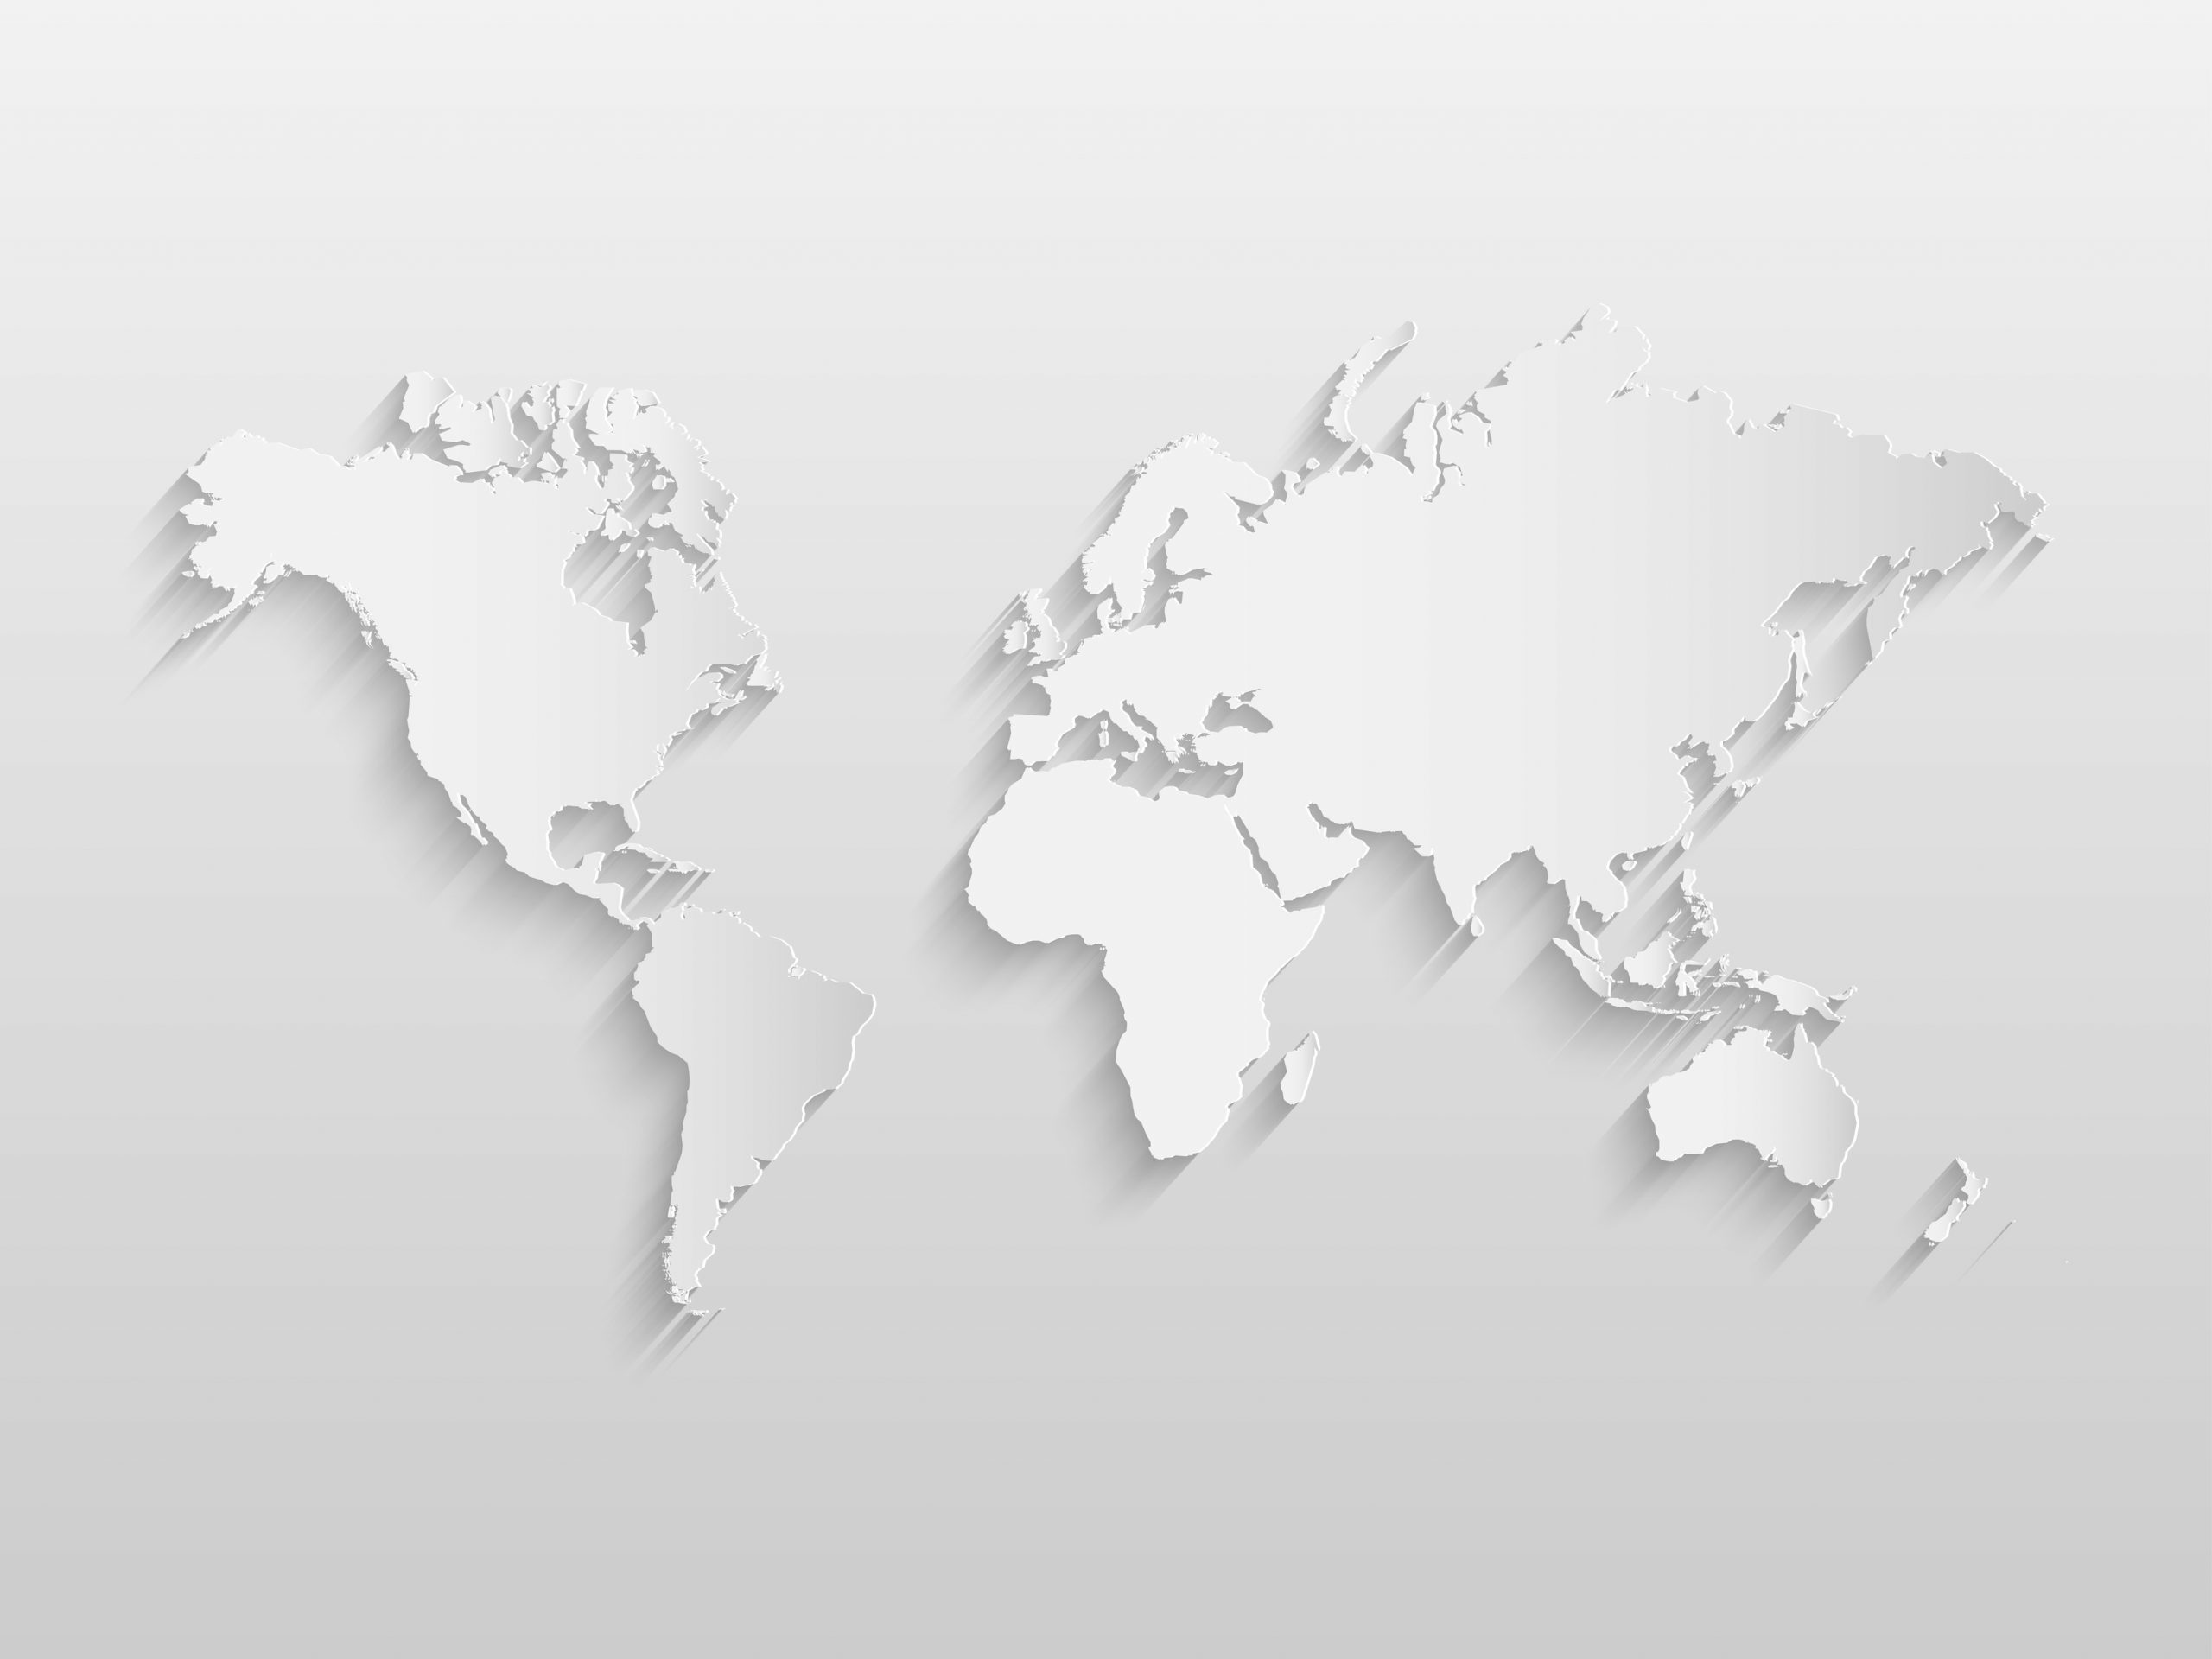 Illustration of a world map on a paper background.